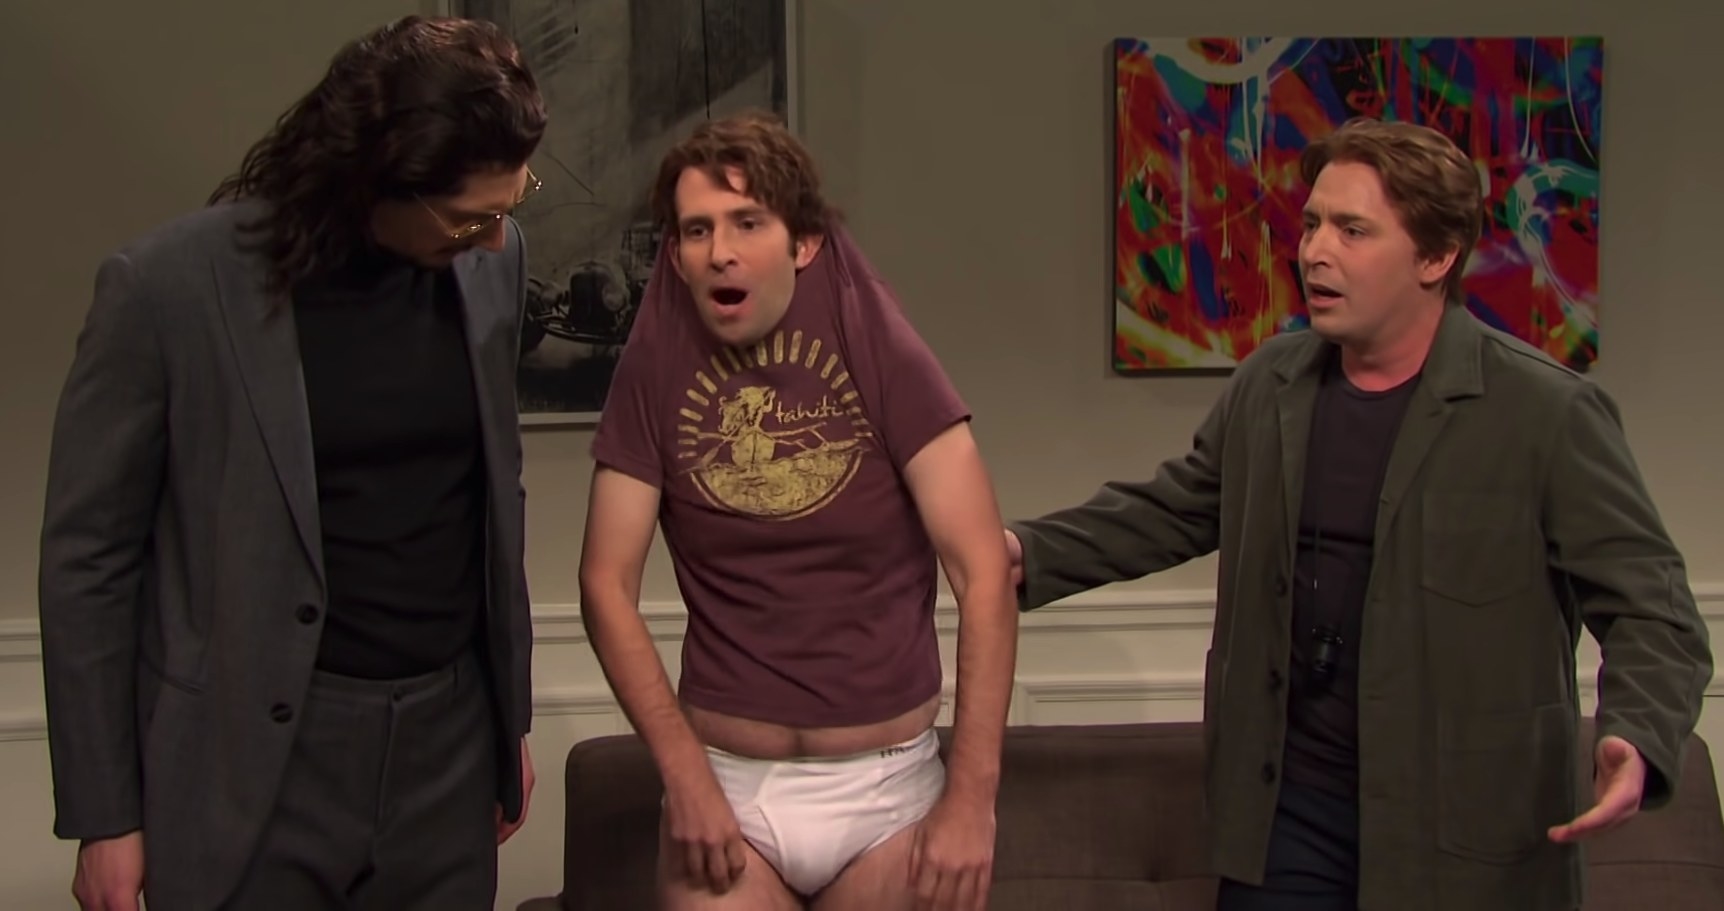 Kyle Mooney in his underwear, shit pulled over his head, singing